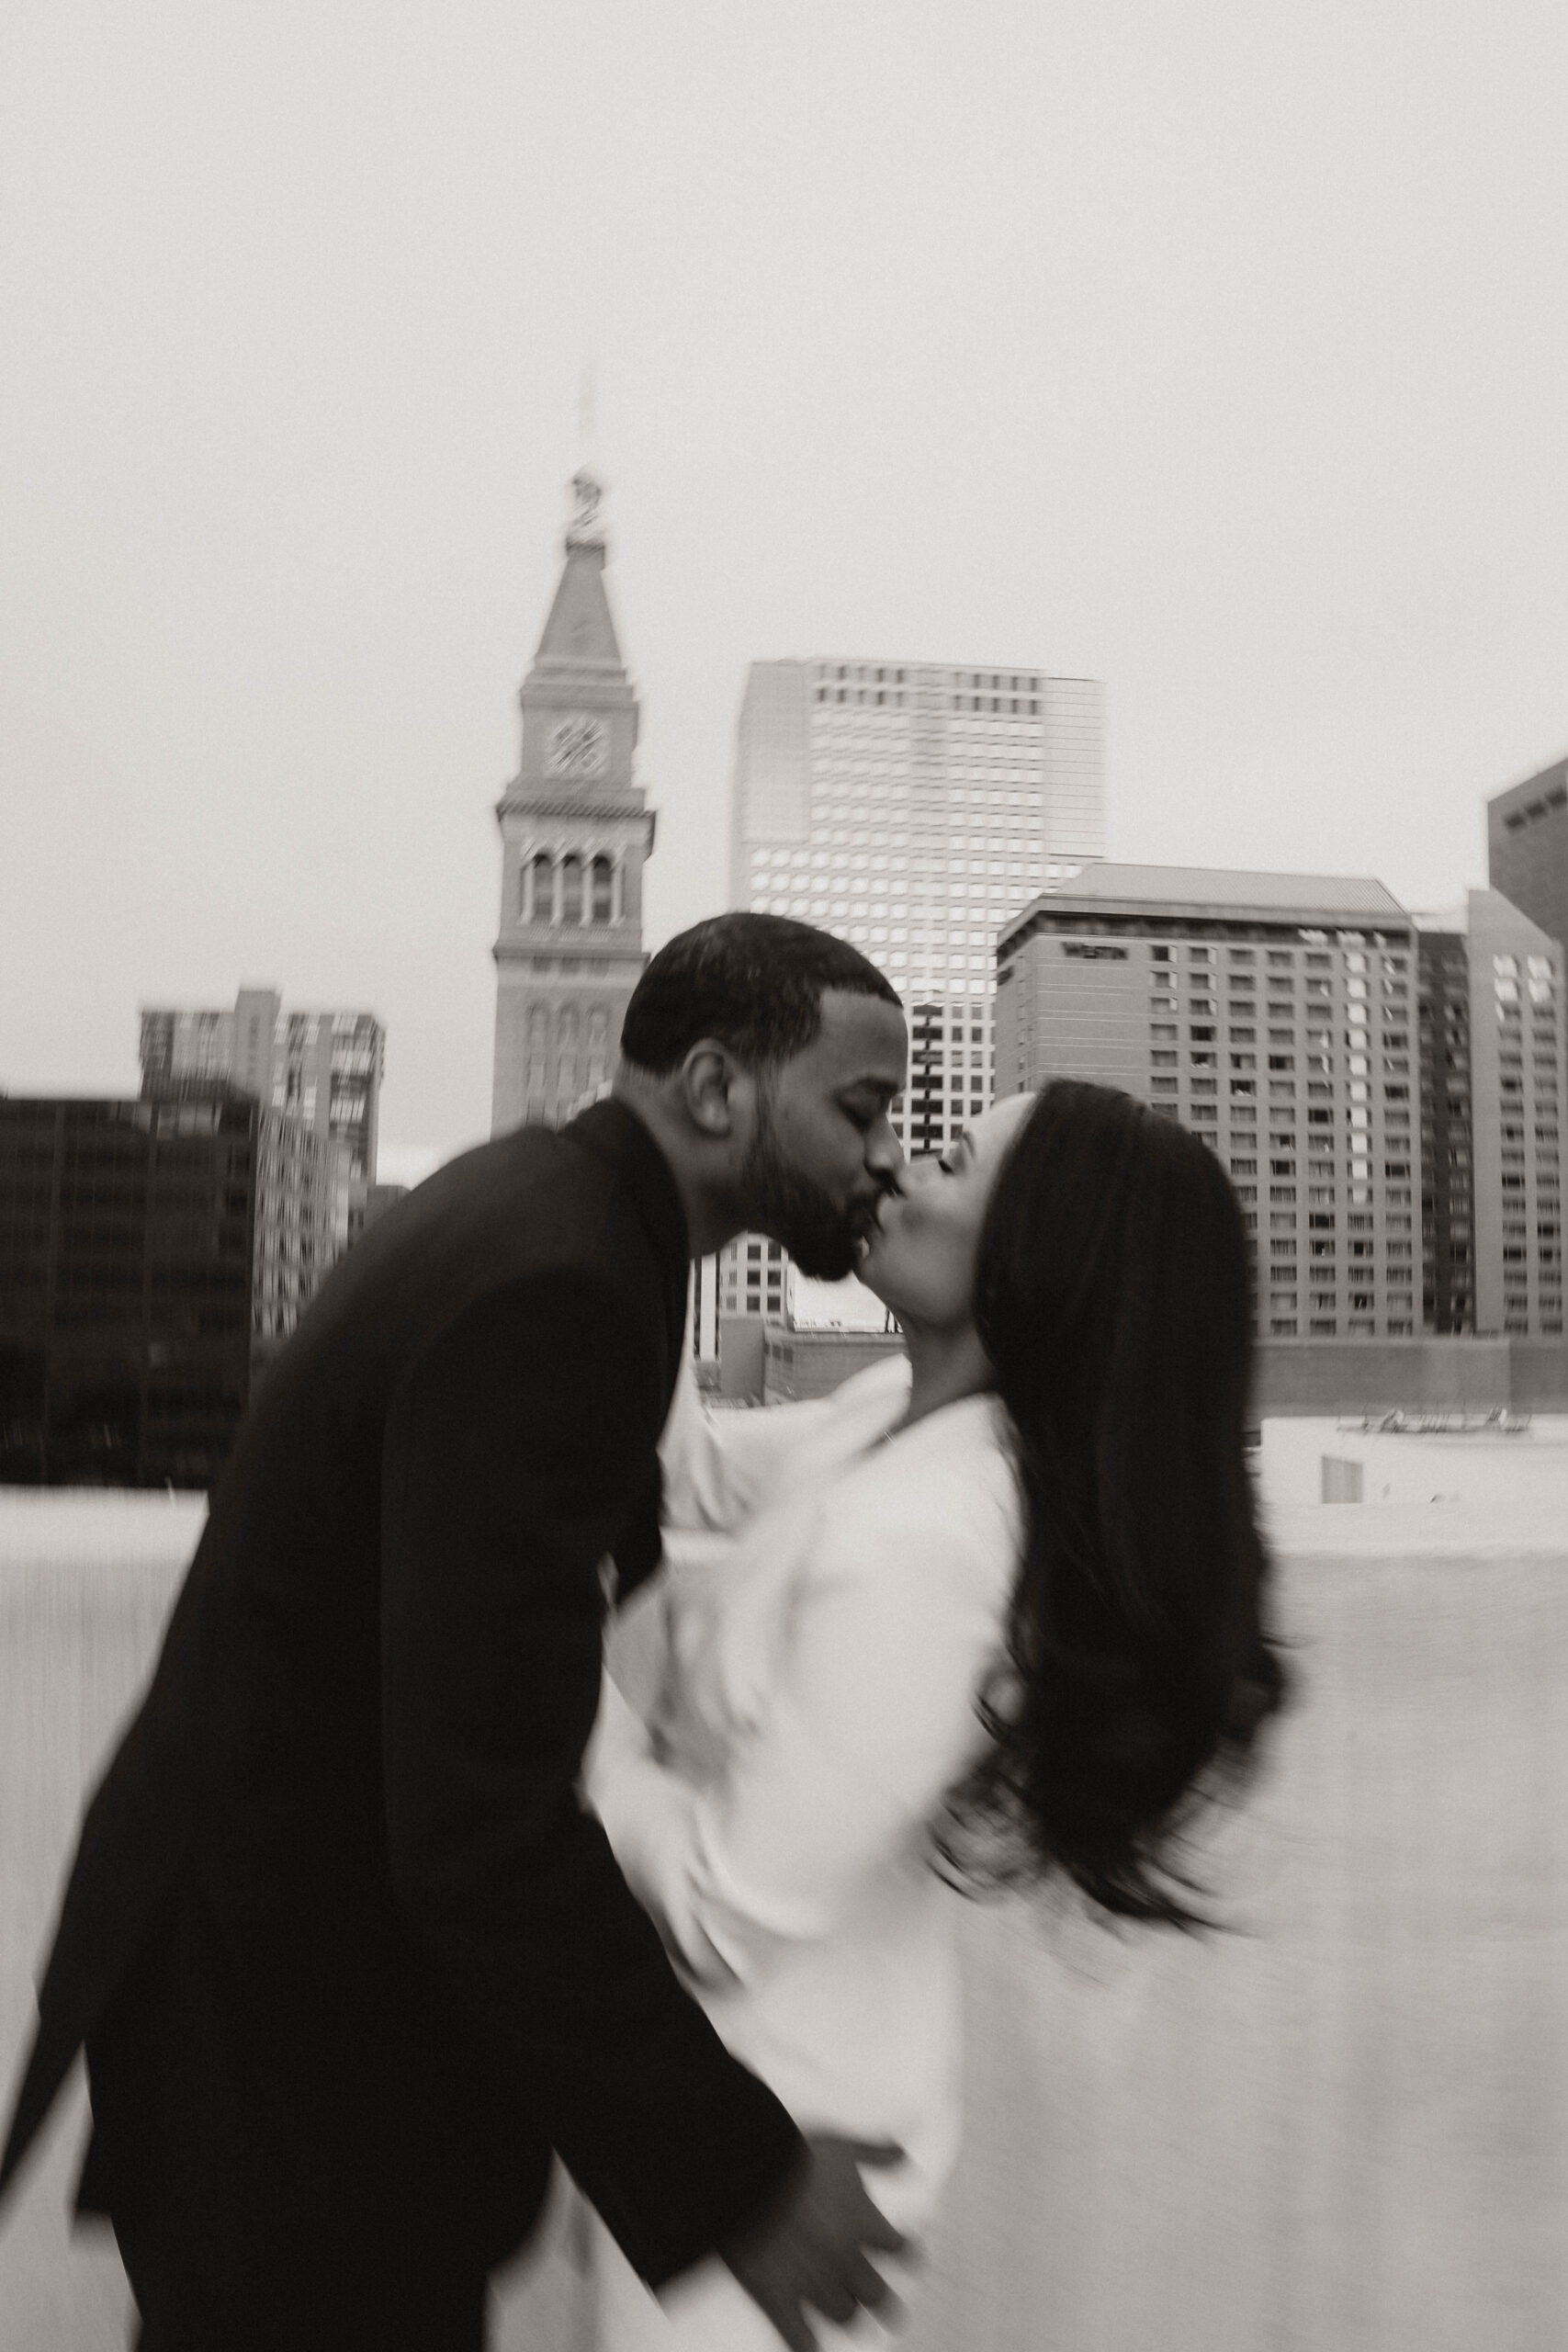 blurry photo of engaged couple kissing on a rooftop 